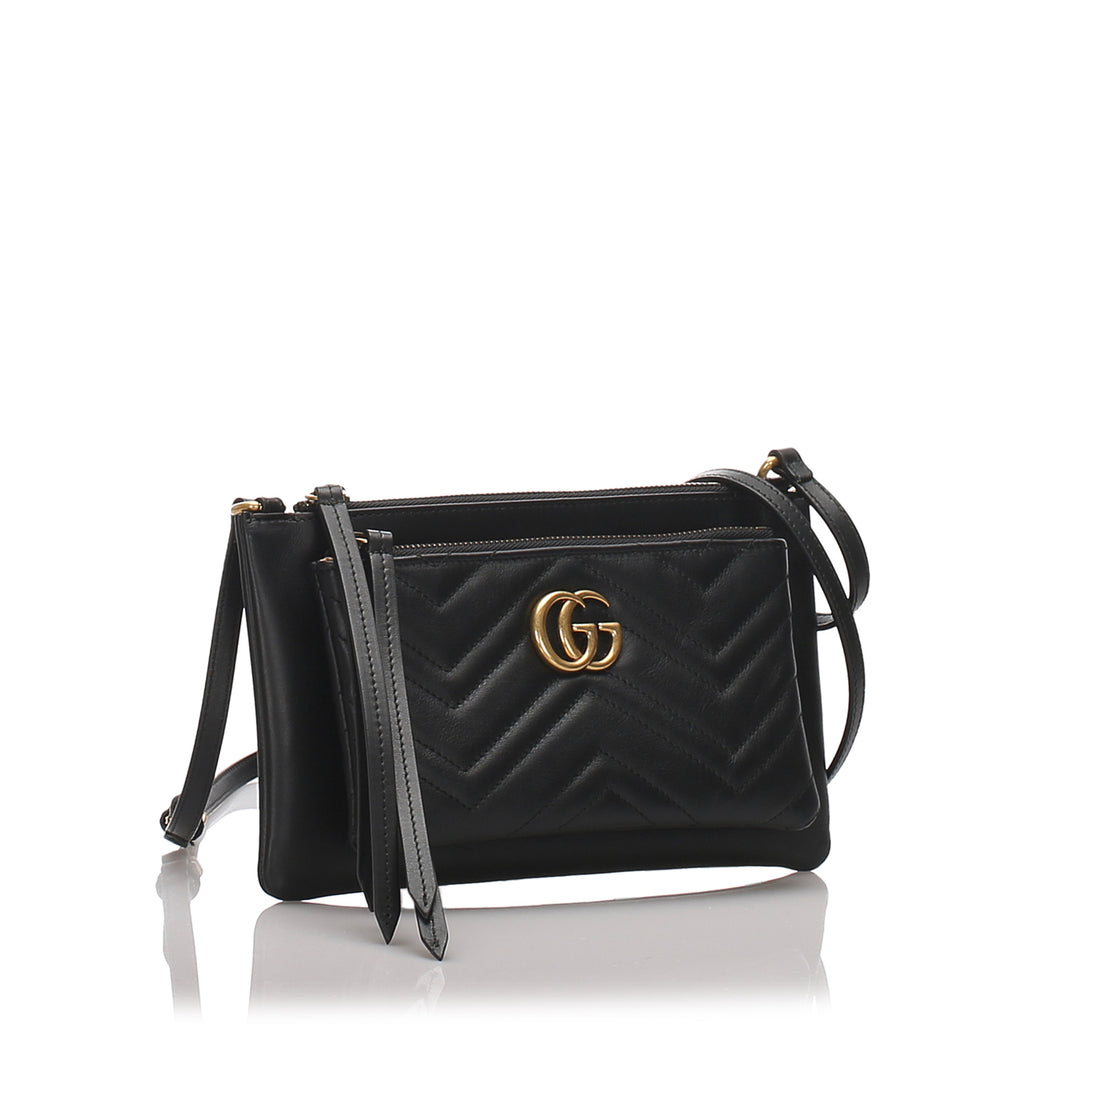 Gucci Black Leather Marmont GG Small Crossbody Bag – I MISS YOU VINTAGE